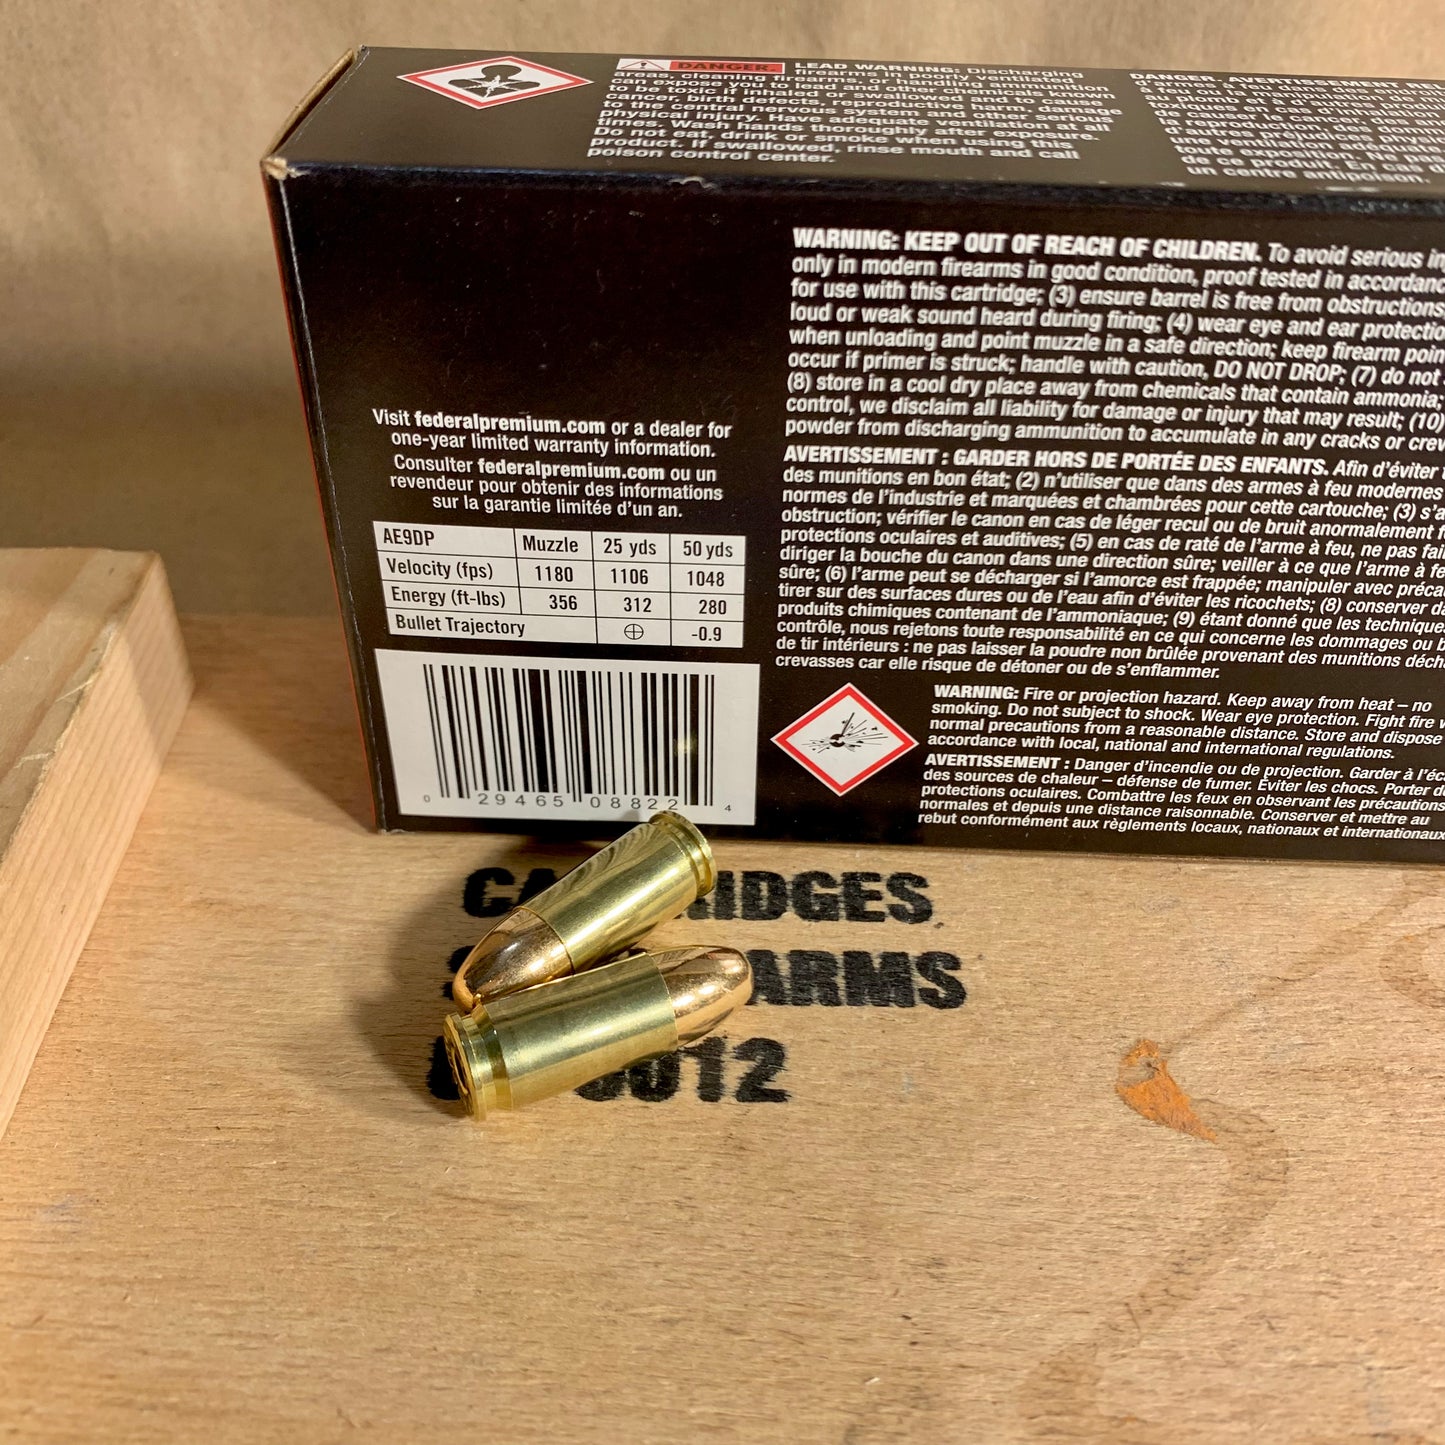 50 Count Box Federal 9mm Luger Ammo 115gr FMJ - AE9DP - American Eagle